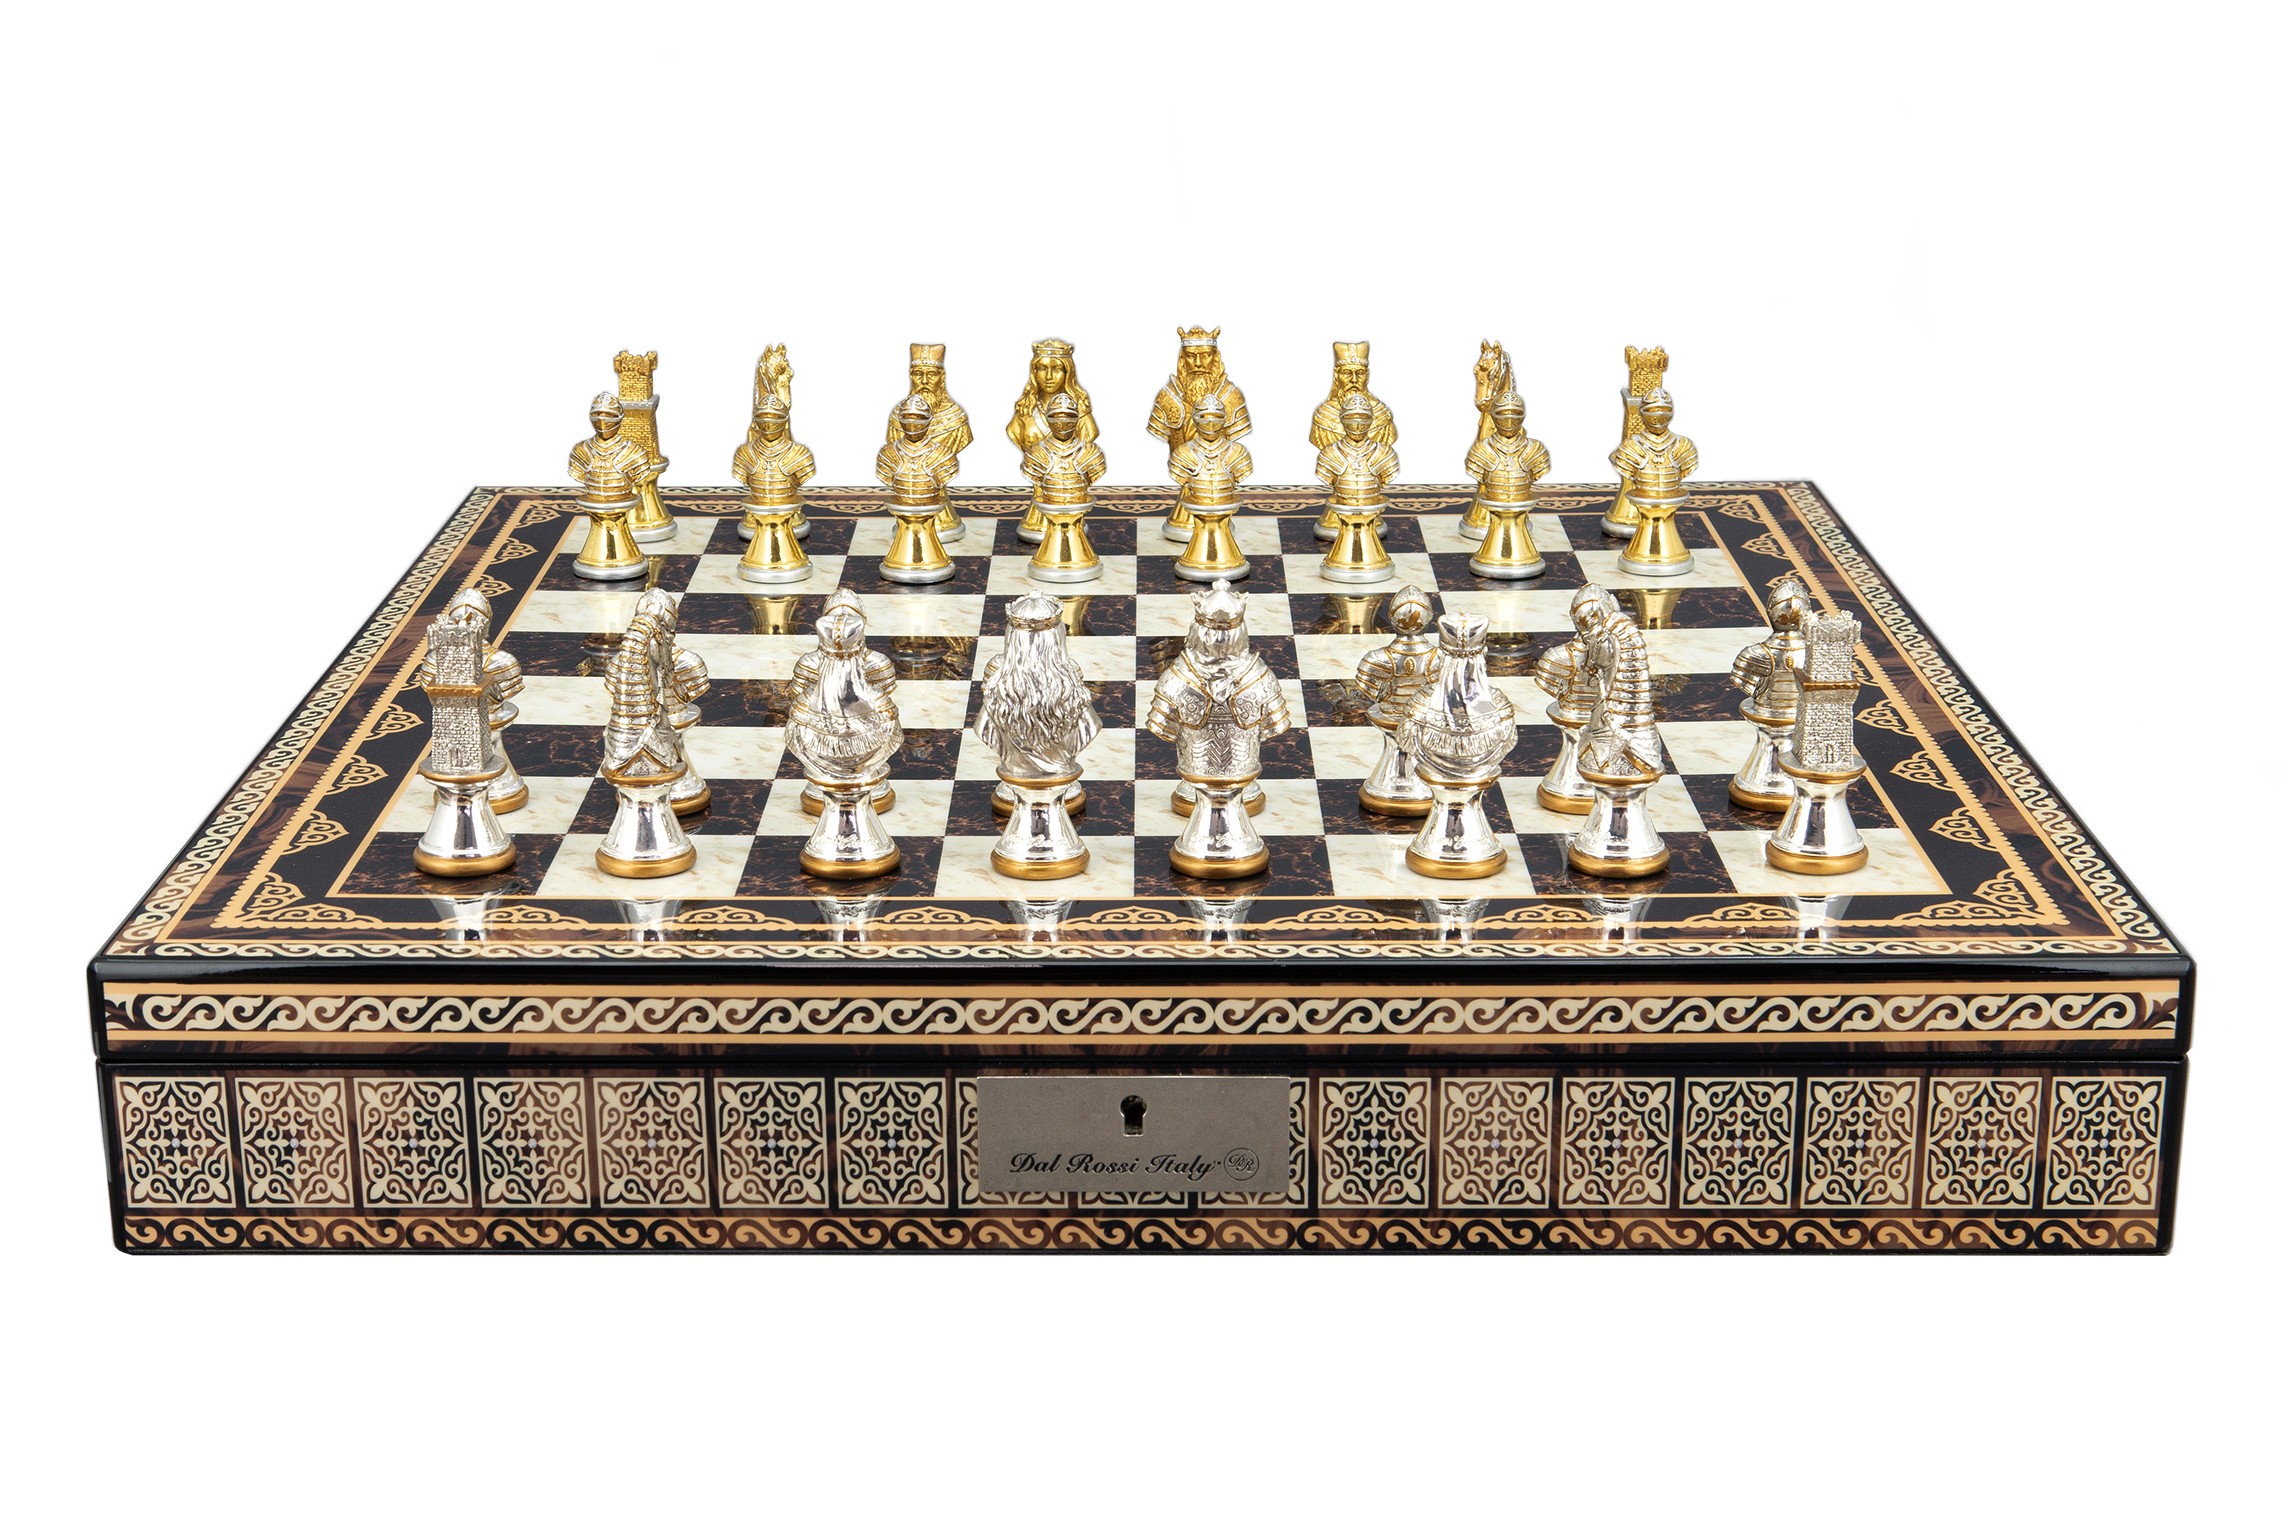 Dal Rossi Medieval Warriors Metal Chessmen 85mm on a Mosaic Finish Shiny Chess Box with Compartments 20"